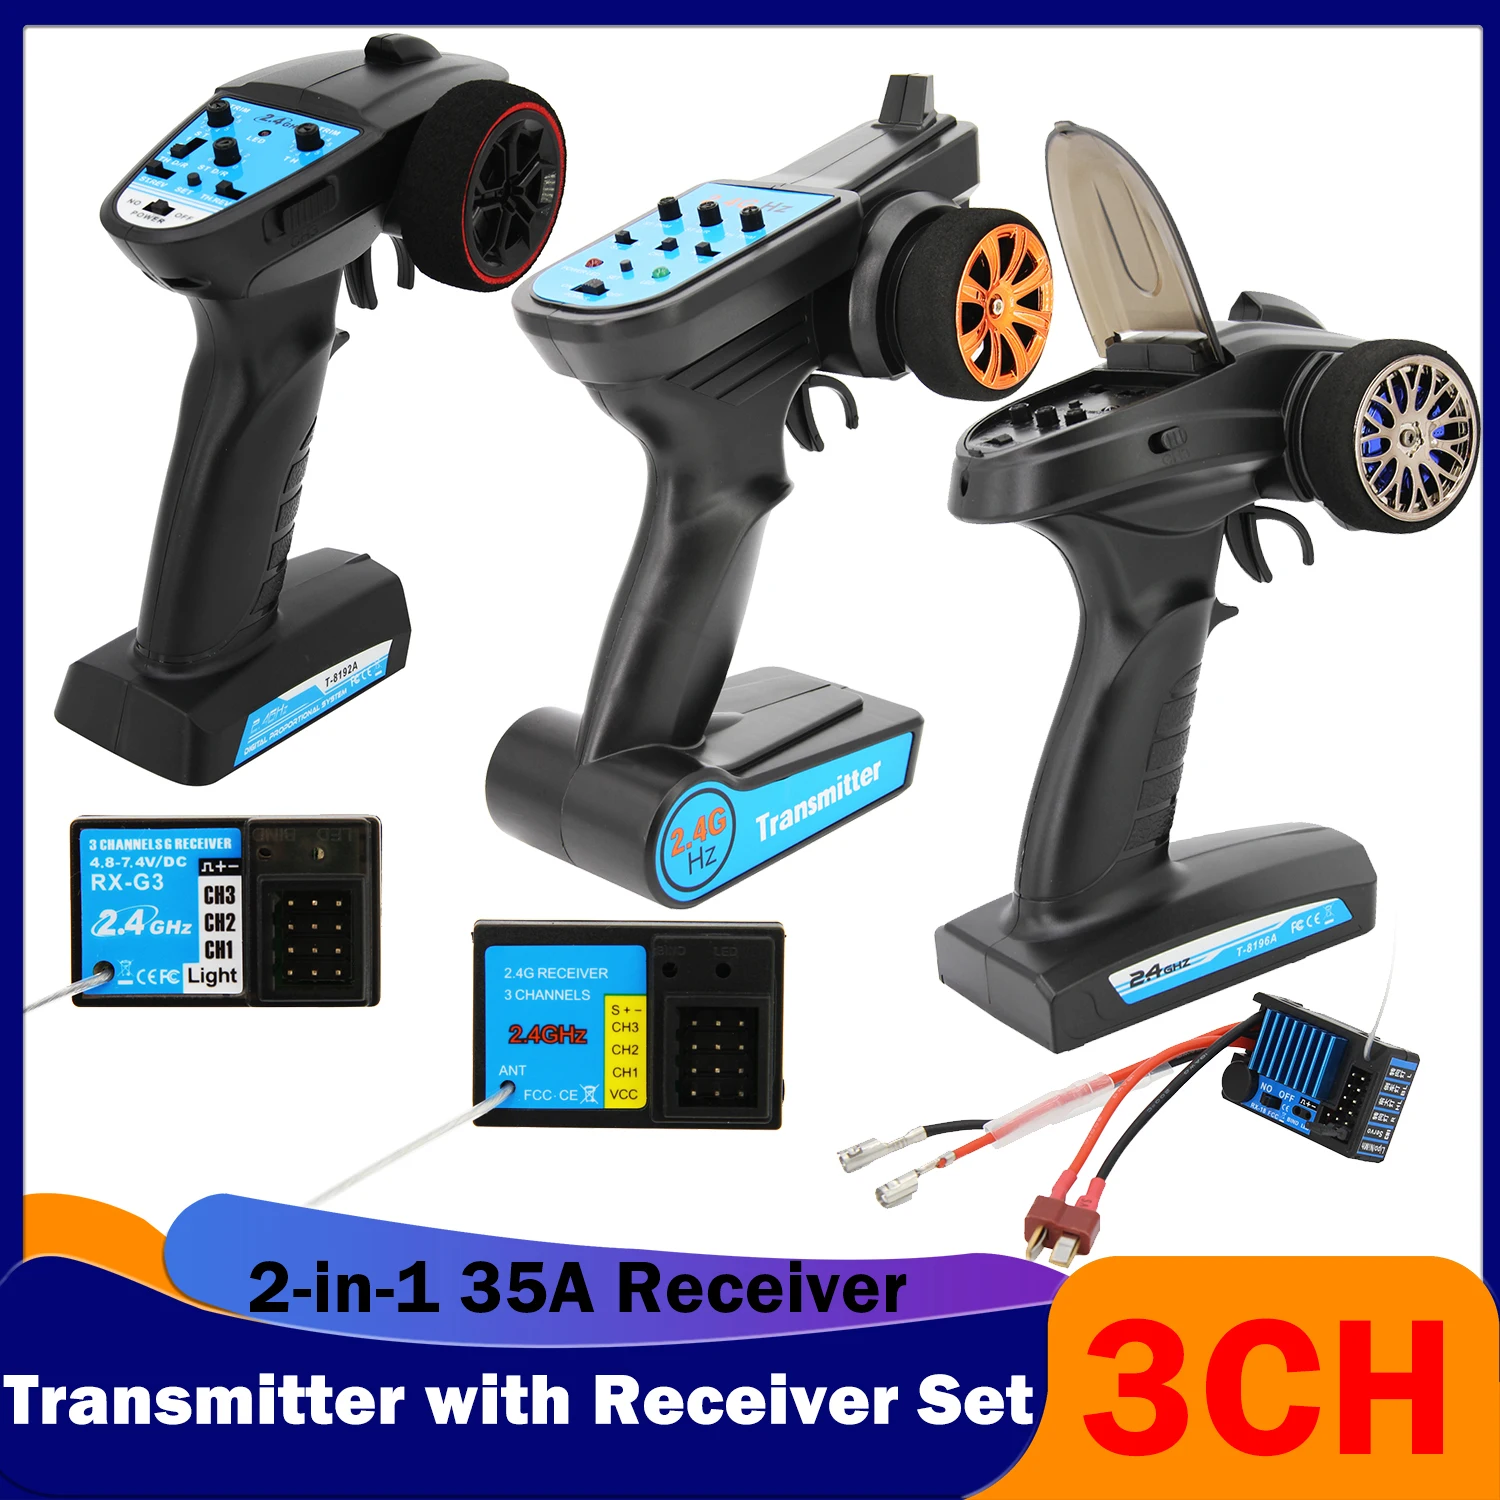 

3CH Digital Transmitter 2.4G Radio Systems Three-channel Receiver Remote Controller 2-in-1 35A Set for RC Car Tank Boat Model